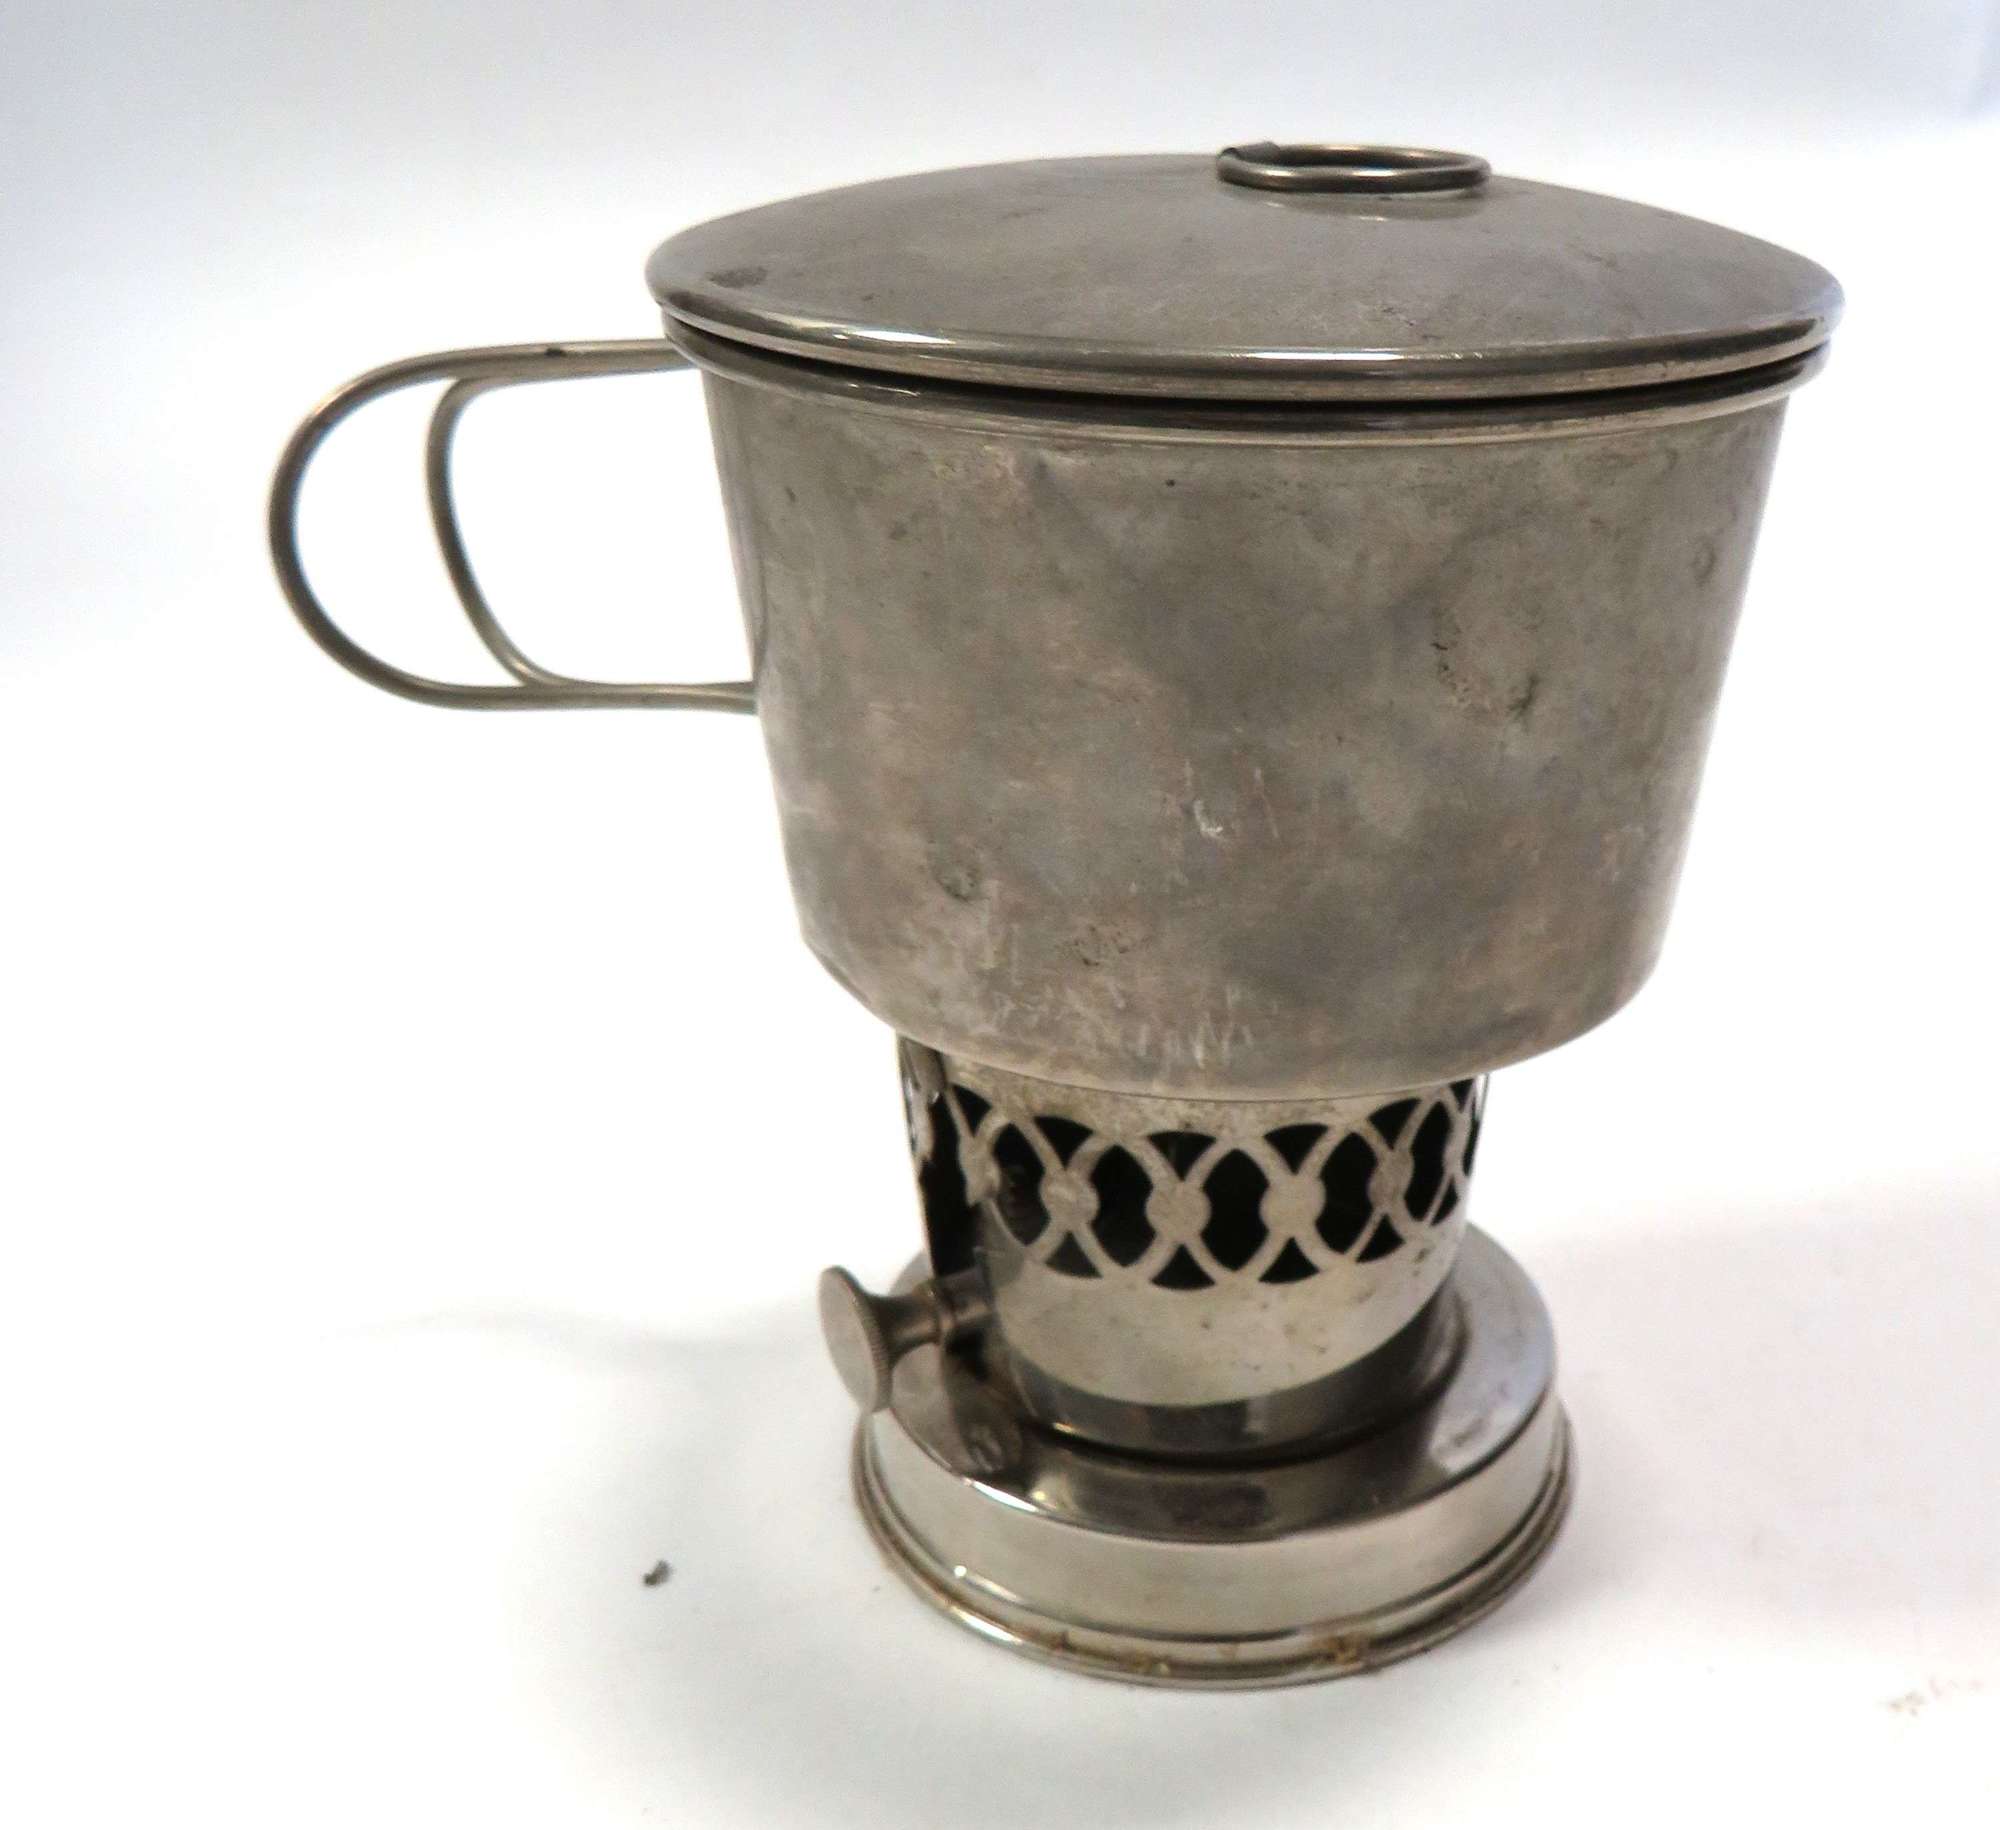 WW1 Officers Trench Campaign Small Stove and Pot